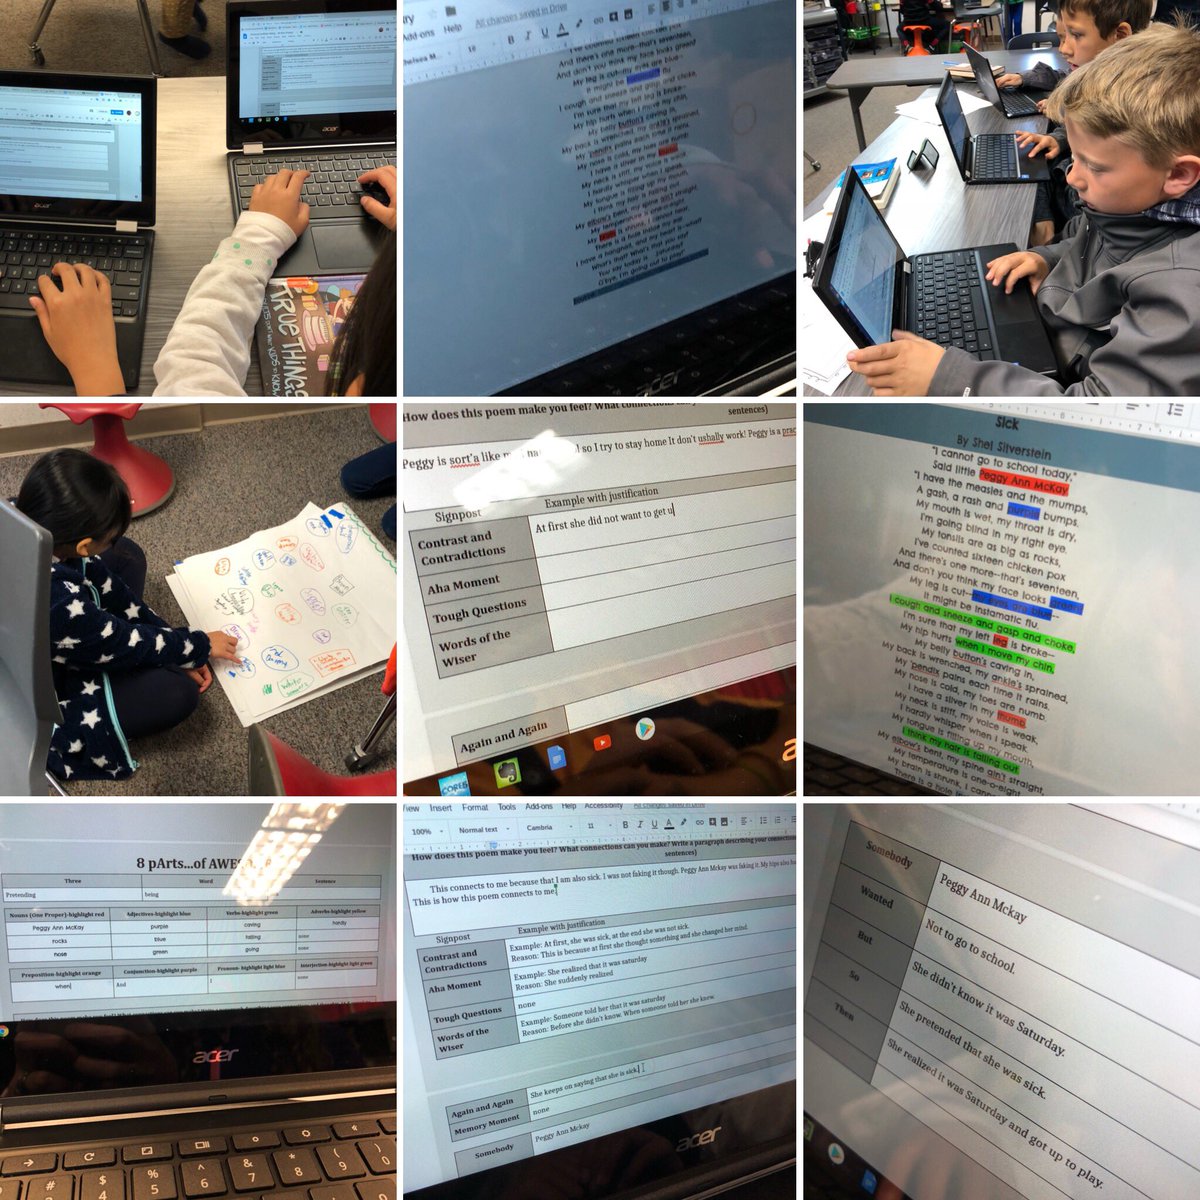 Poetry+8parts+notice&note+SWBST+connections=awesome @NoddinElem @usdlearns @eduprotocols @jcorippo @mhebern